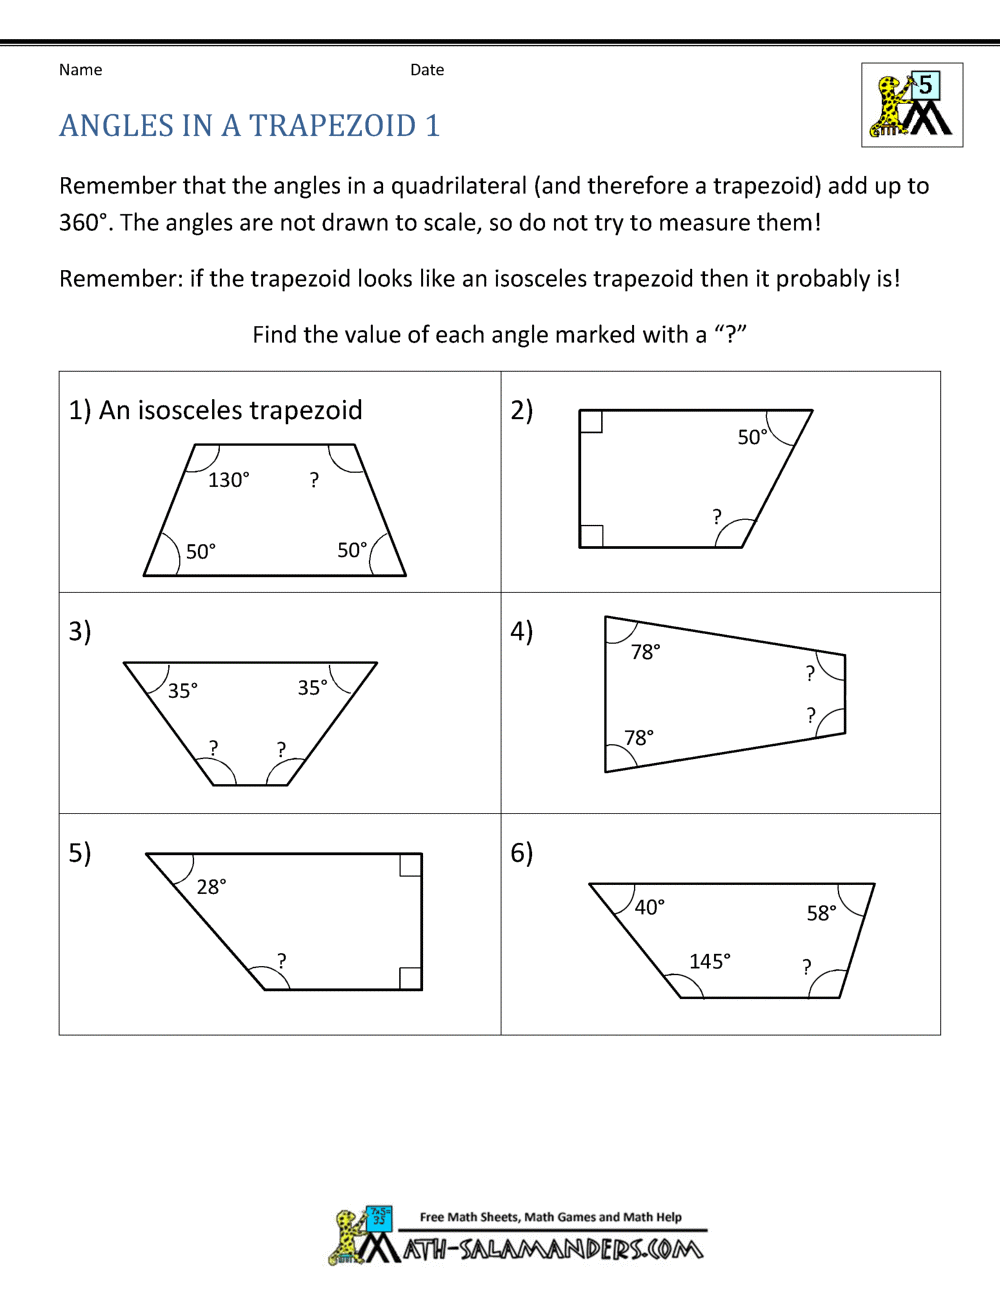 22th Grade Geometry For Triangle Angle Sum Worksheet